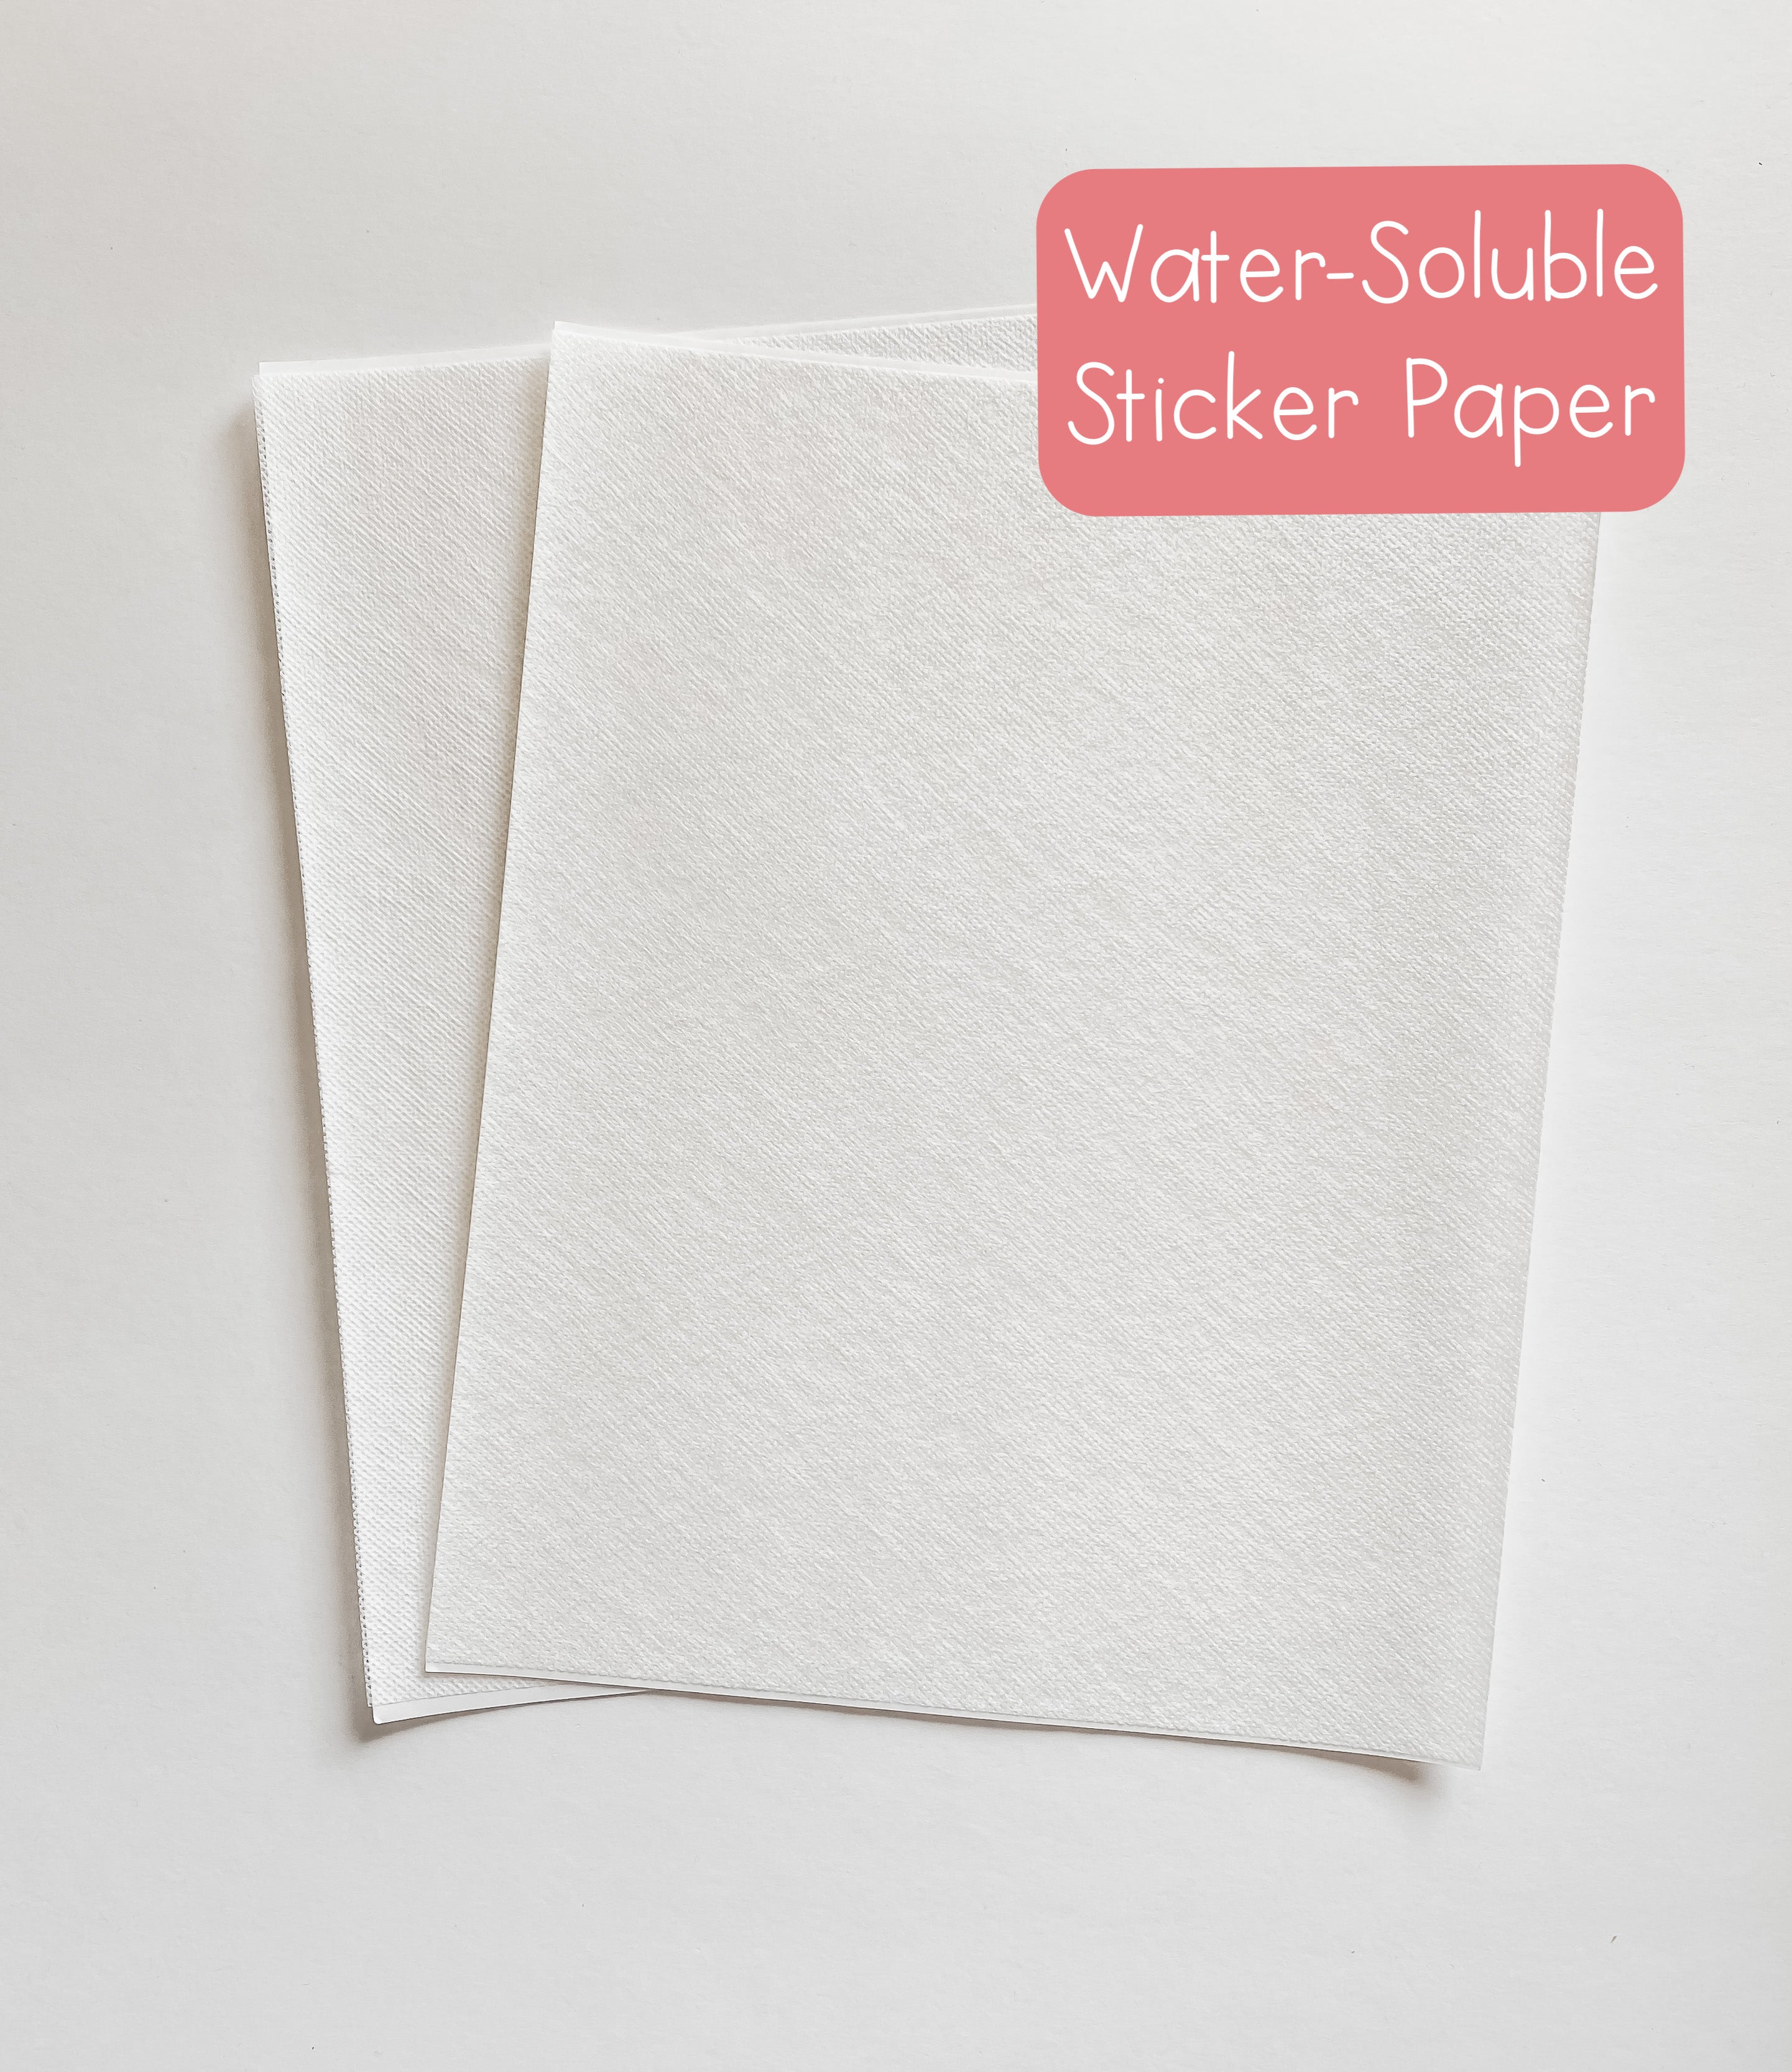 Water-Soluble Sticker Paper – threadunraveled